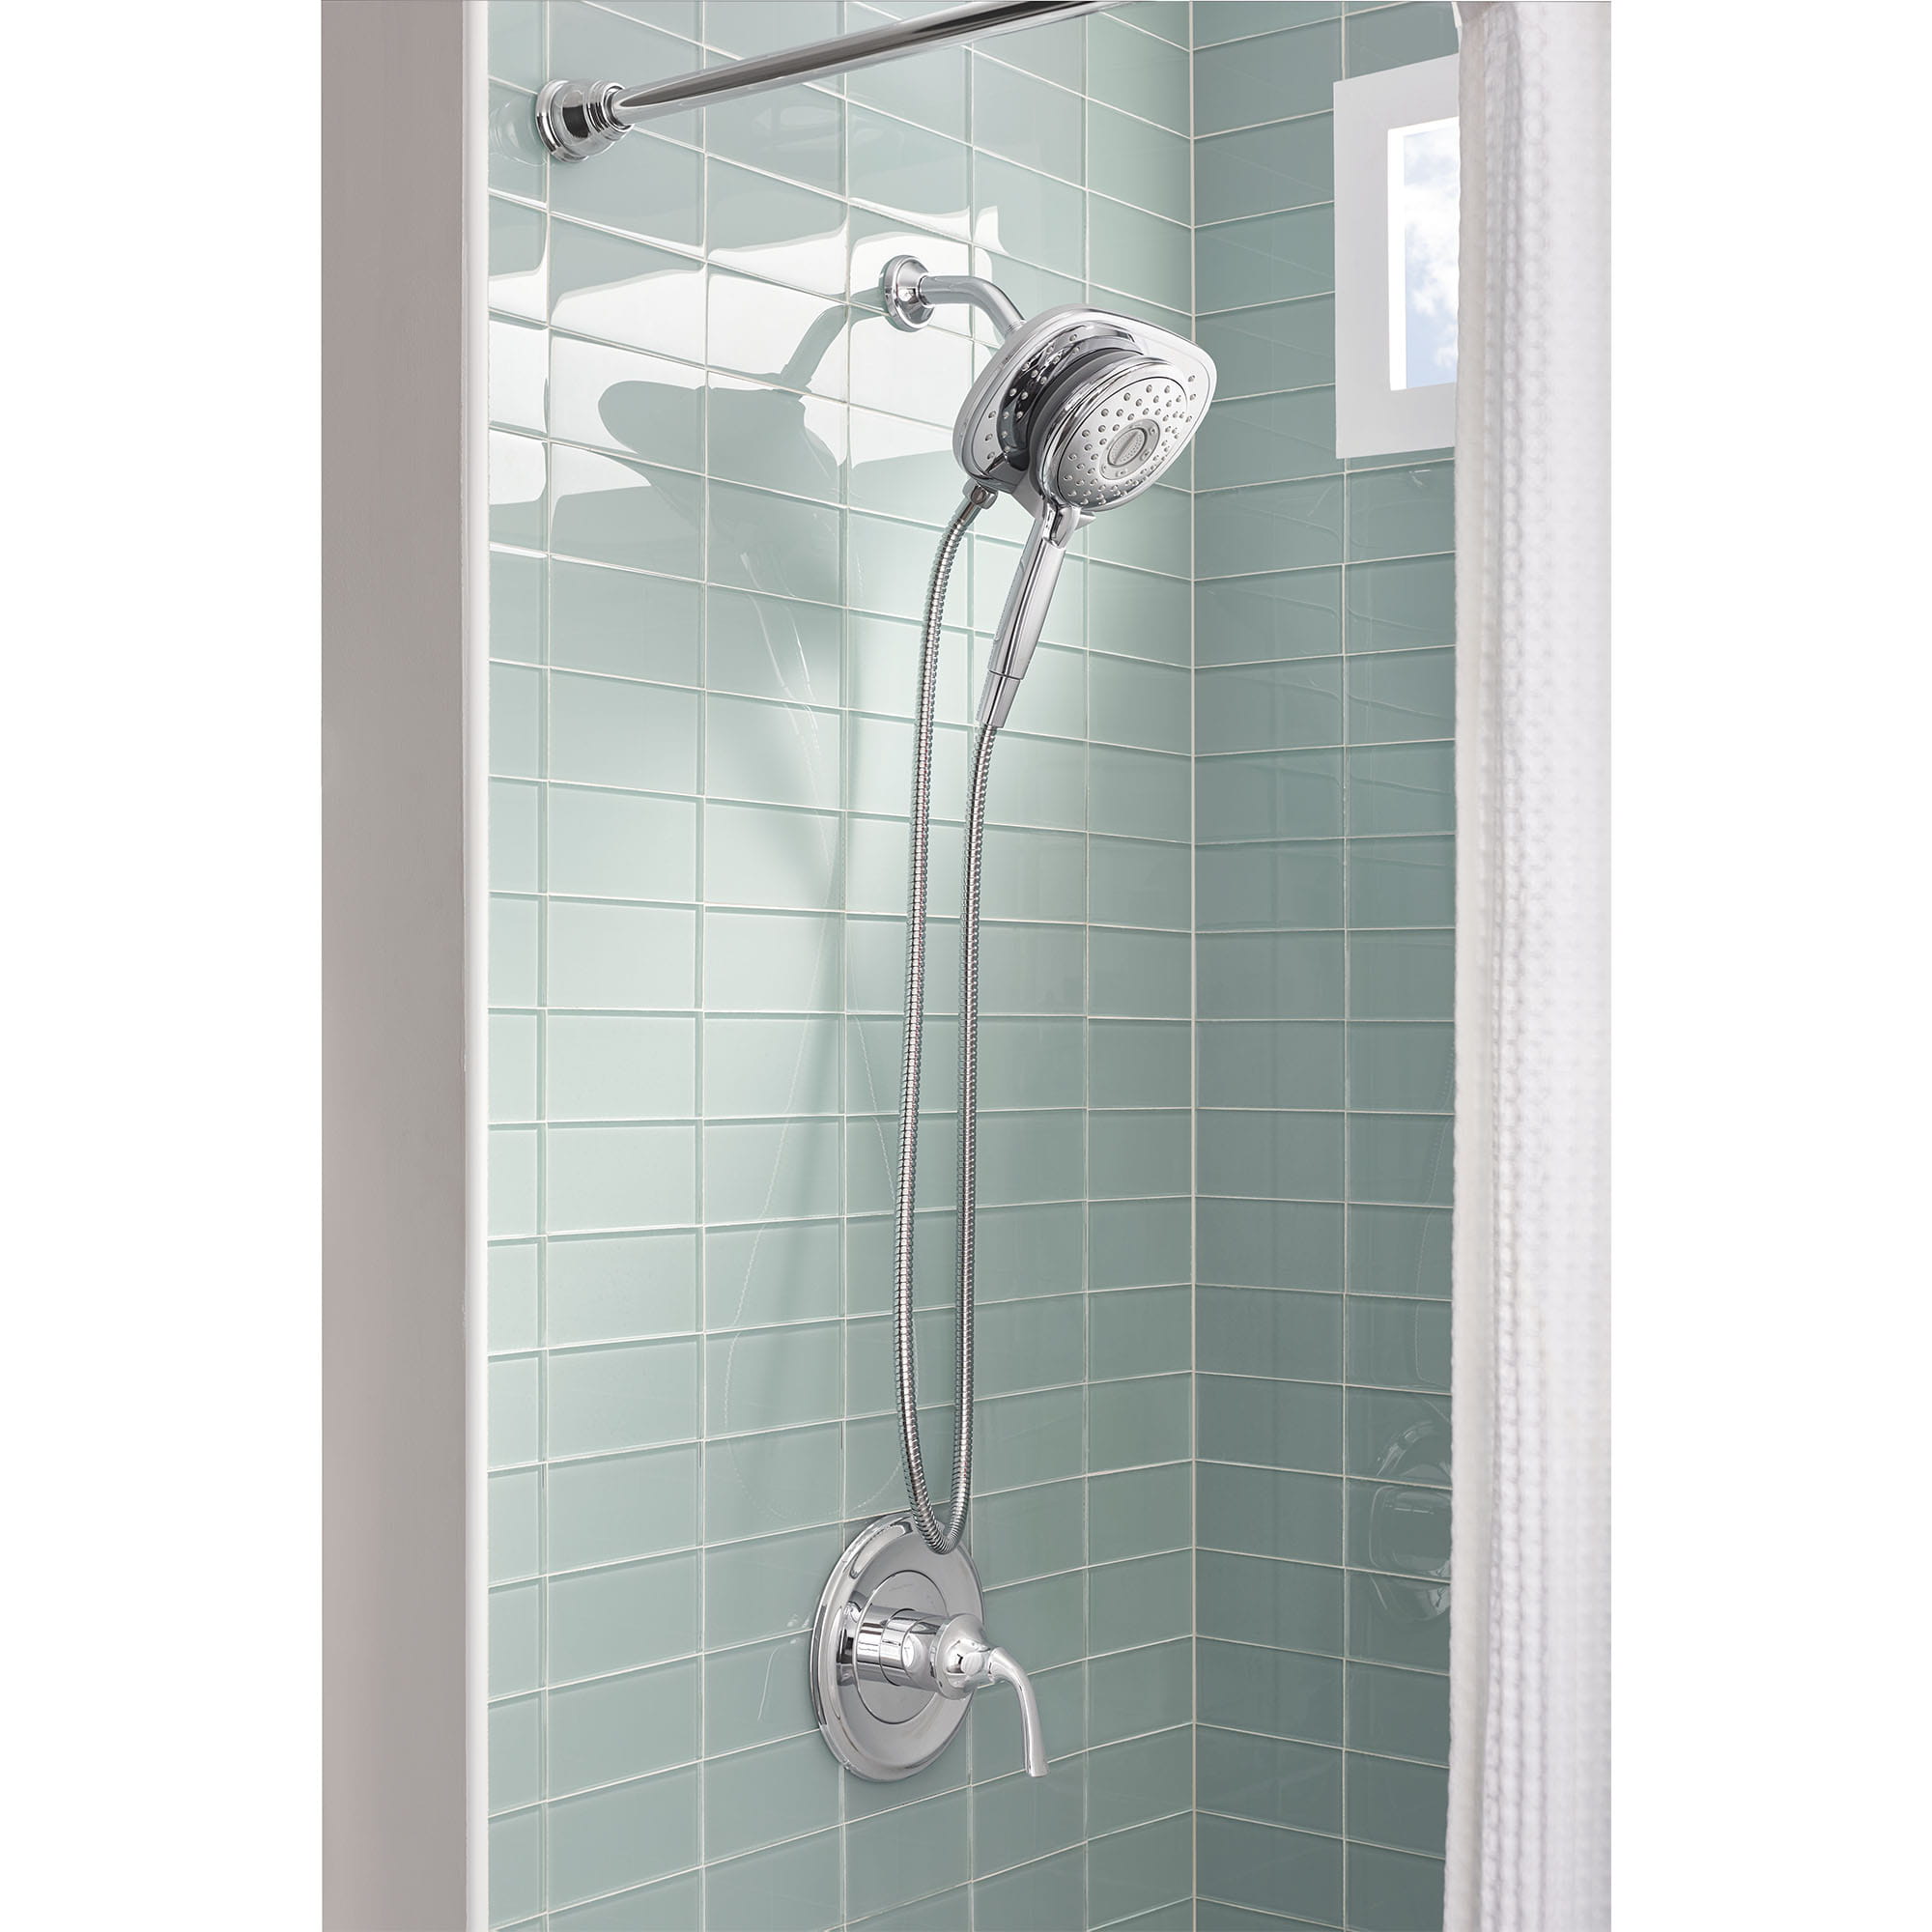 Spectra Duo 2.5 gpm/9.5 L/min 4-Function 2-in-1 Showerhead